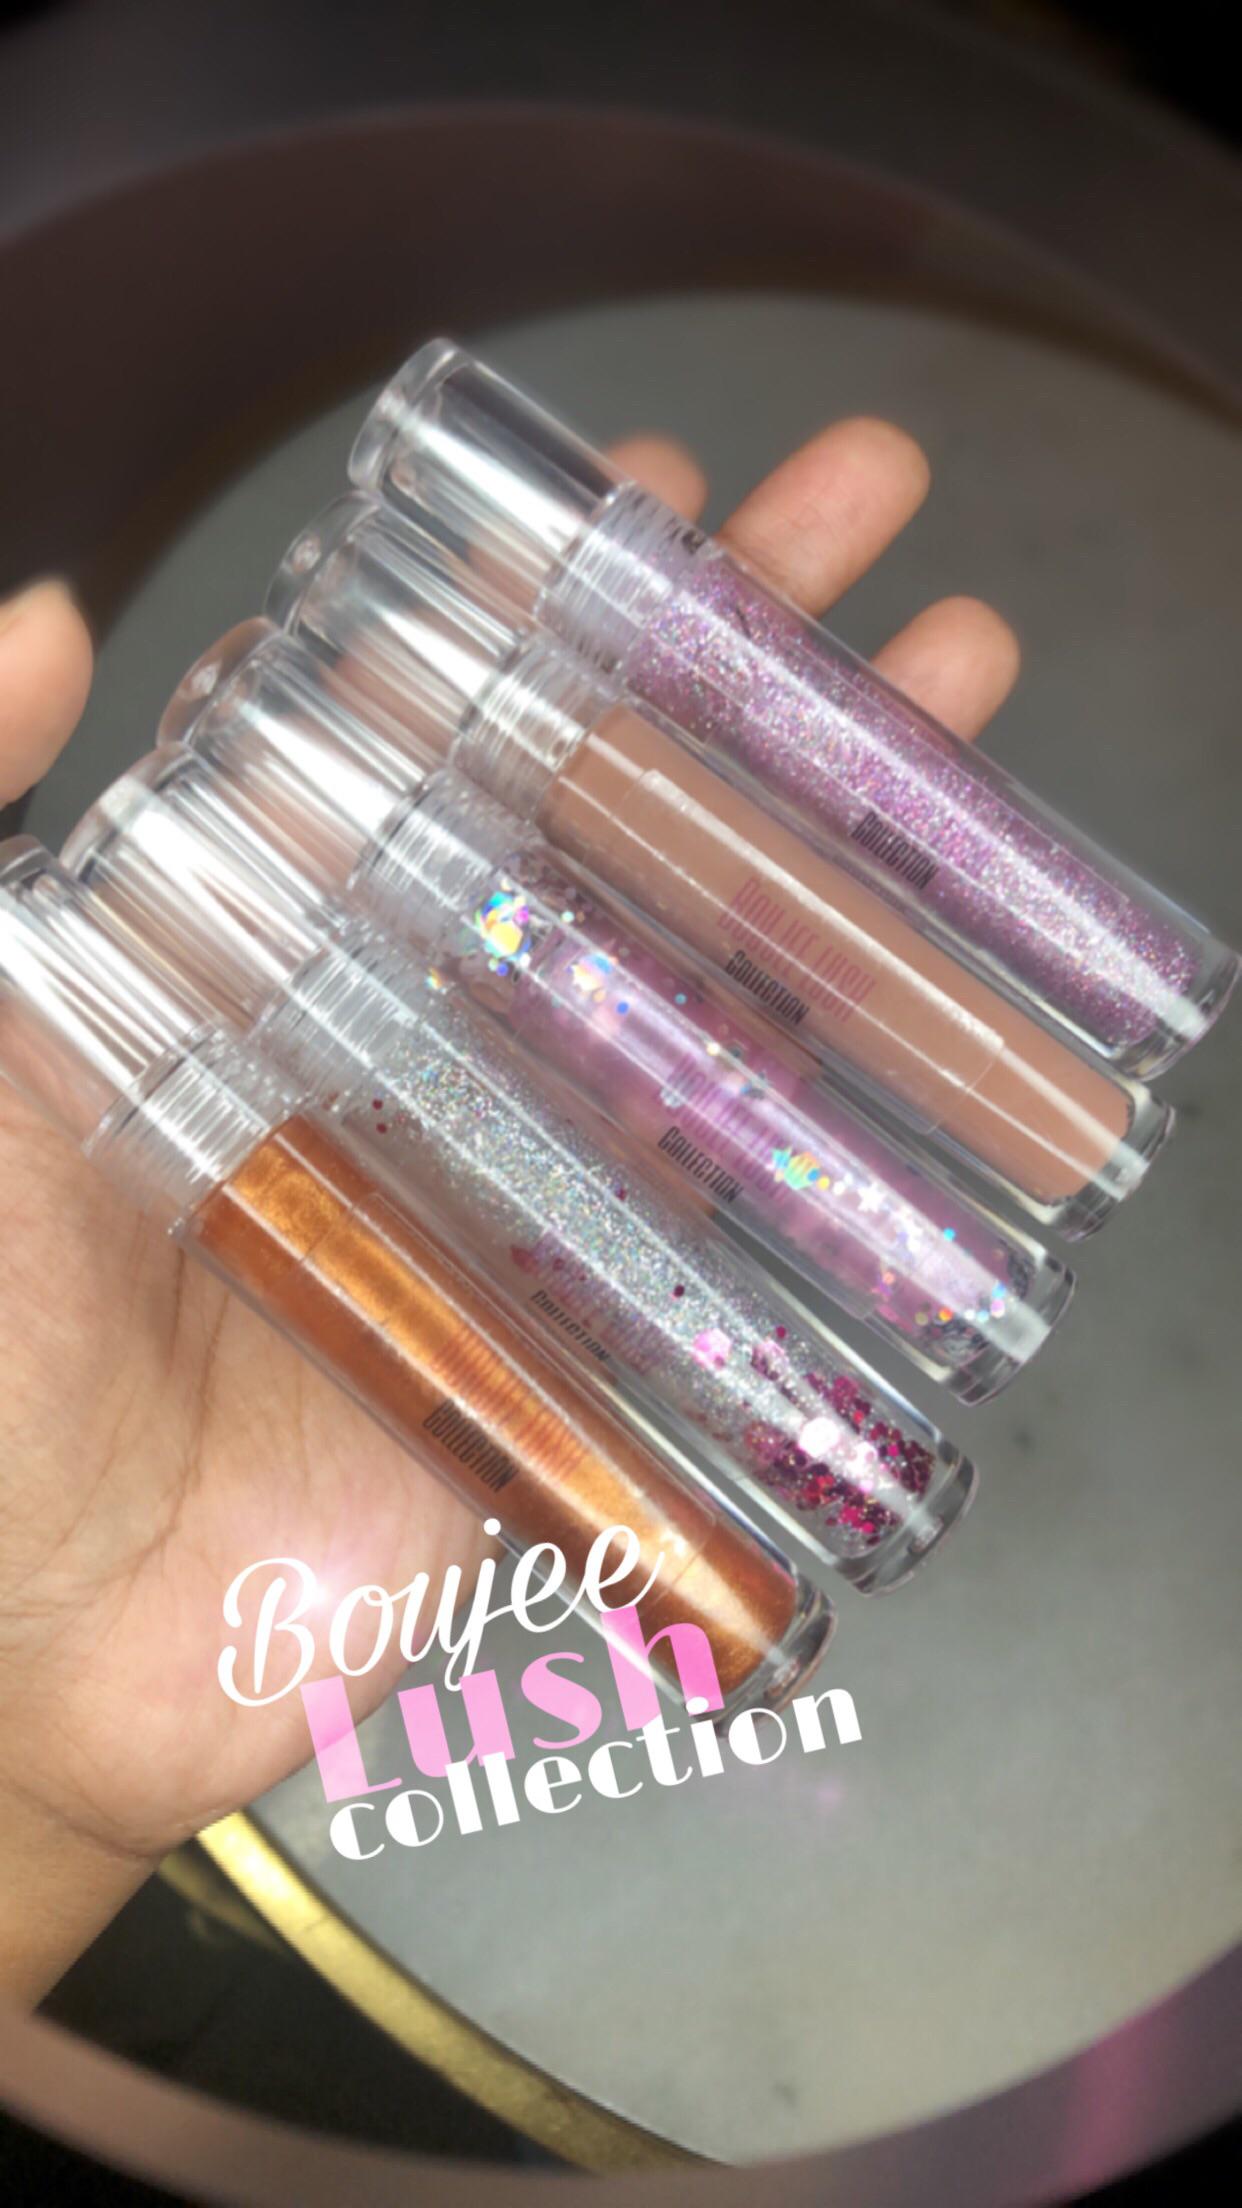 black owned lipgloss company👇🏽pigmented lipglosses available 💕 | Scrolller